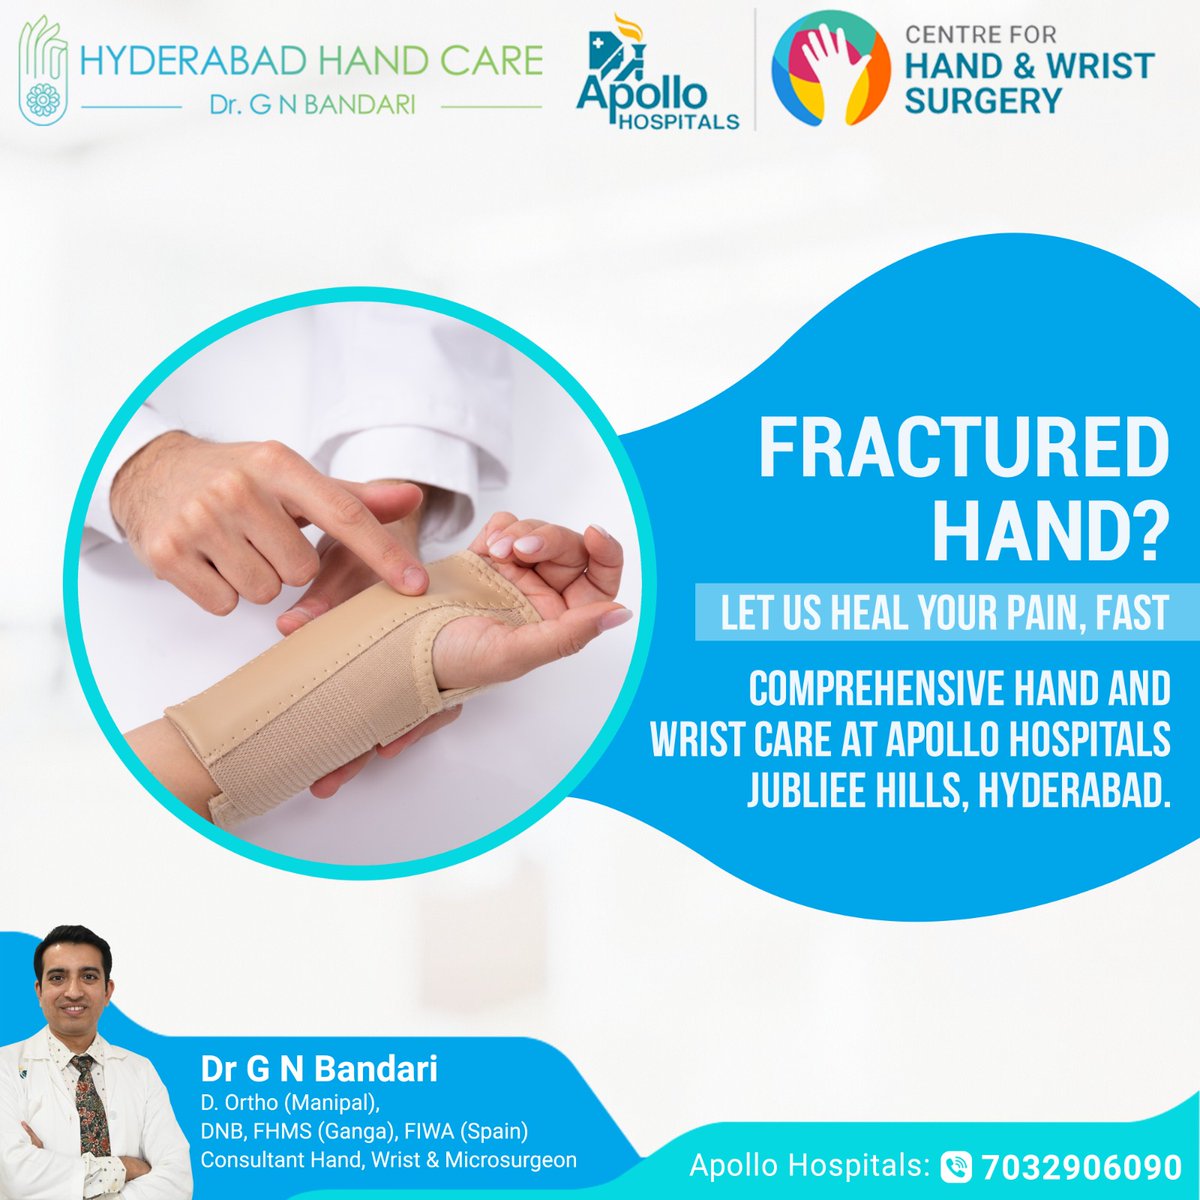 Fractured Hand ?
Let us Heal your Pain , Fast
Comprehensive Hand and Wrist care at #ApolloHospitals, #JubileeHills, #Hyderabad. Let us help you find relief.

#DrGopinathBandari #handandwristsurgeon #HandSurgery #WristSurgery
#handcare #besttreatment #besthealthcare